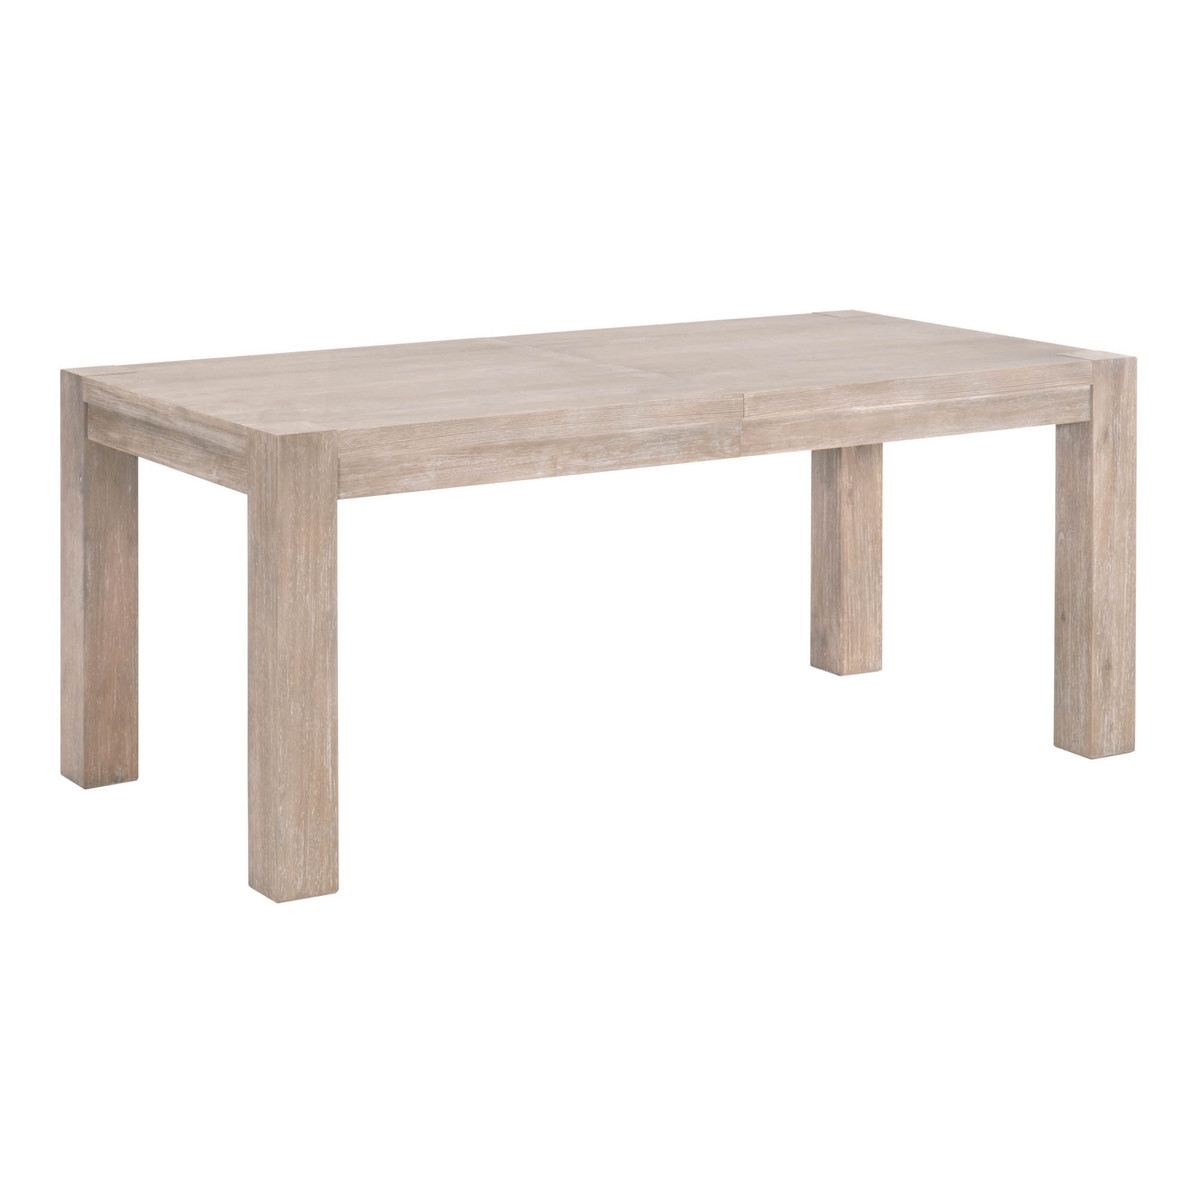 Adler Extension Dining Table - Image 2